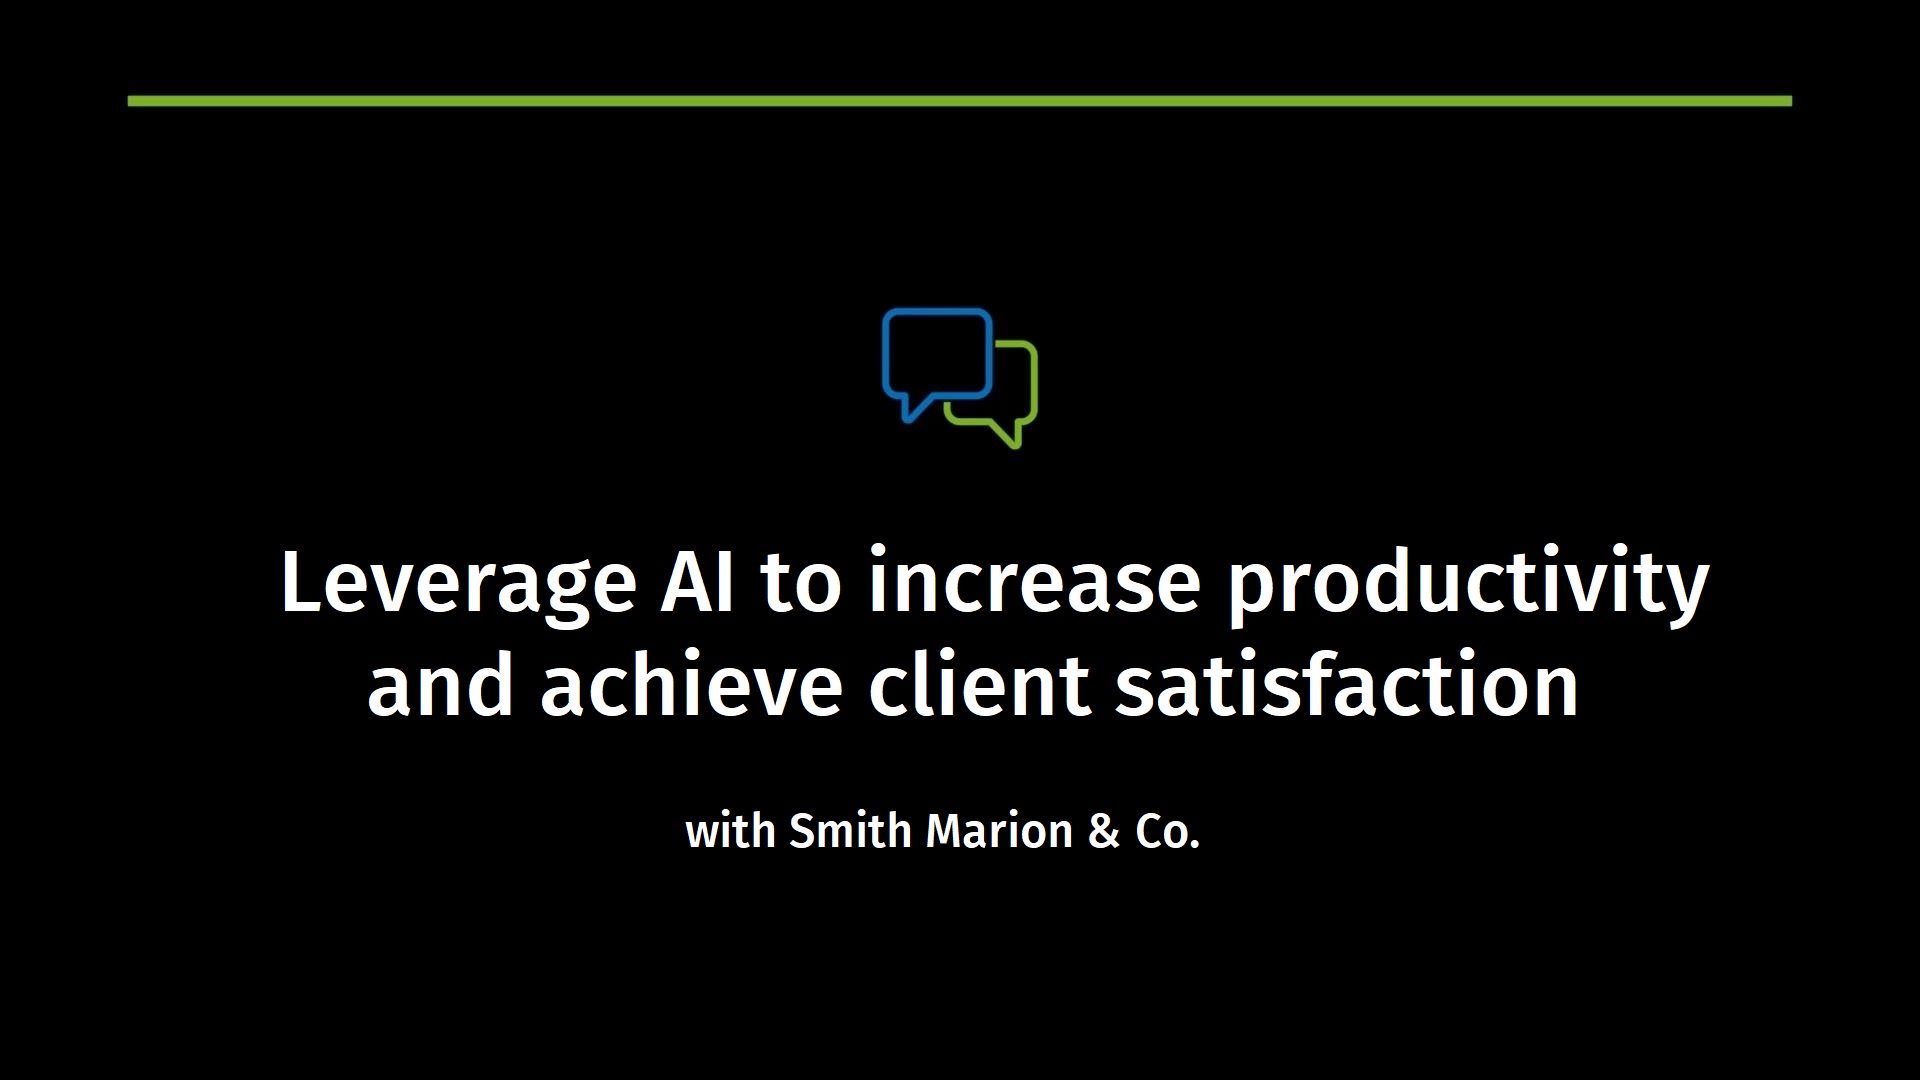 Leverage AI to increase productivity and achieve client satisfaction with Smith Marion & Co.